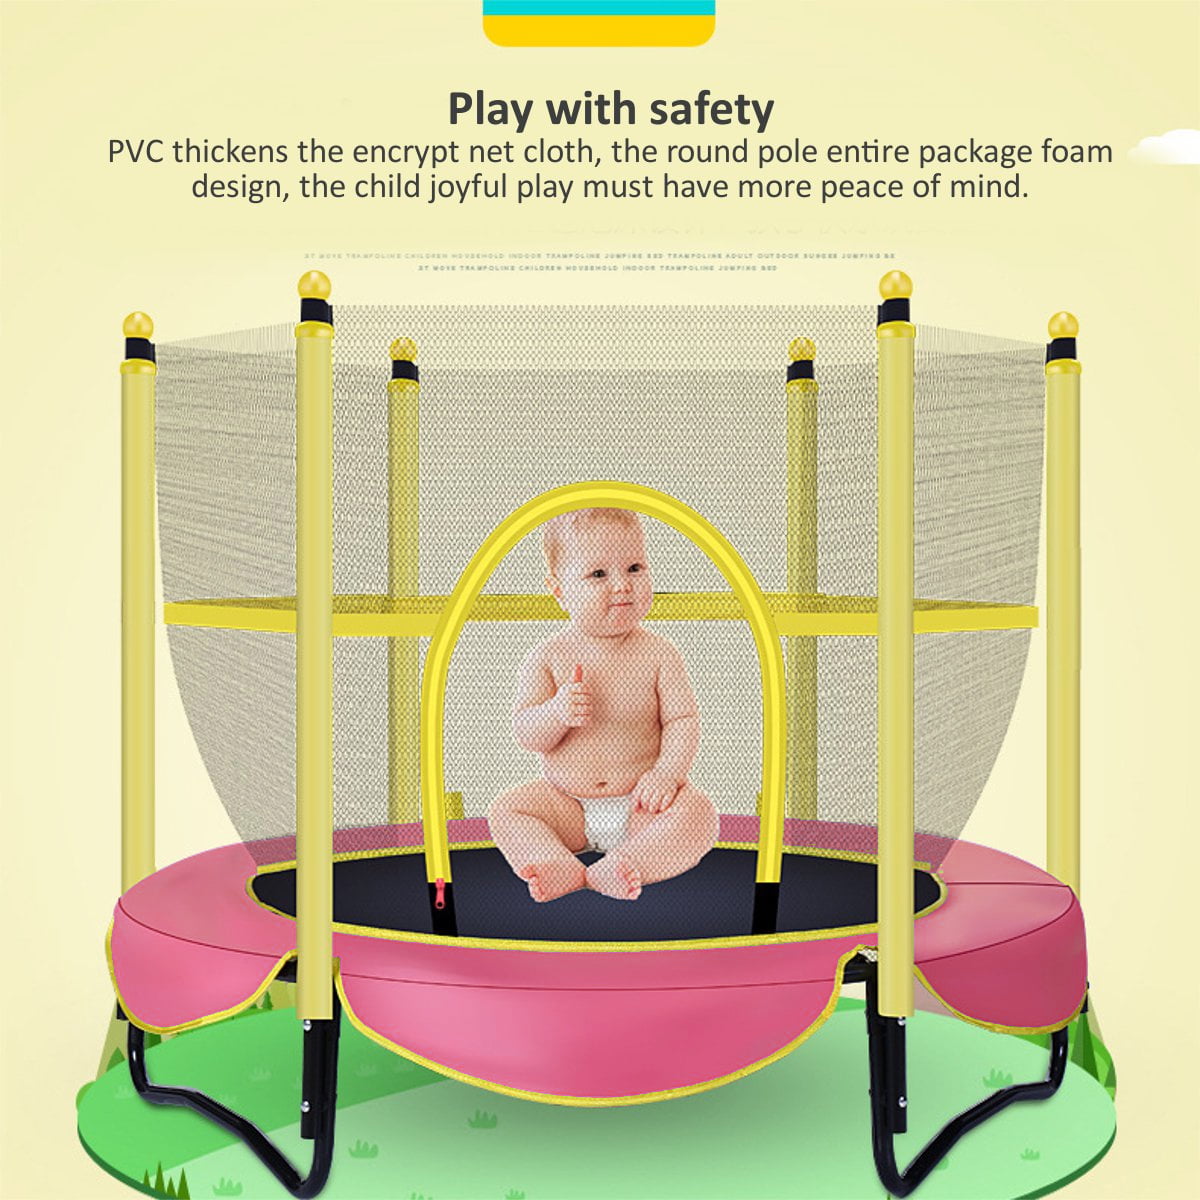 TUBYIC 60 Trampoline for Kids 5 Ft Indoor or Outdoor Mini Toddler Trampoline with Enclosure Net,Safety Trampoline Birthday Gifts for Kids,Baby Toddler Jump Recreational Trampolines Toys,Age 1-8 